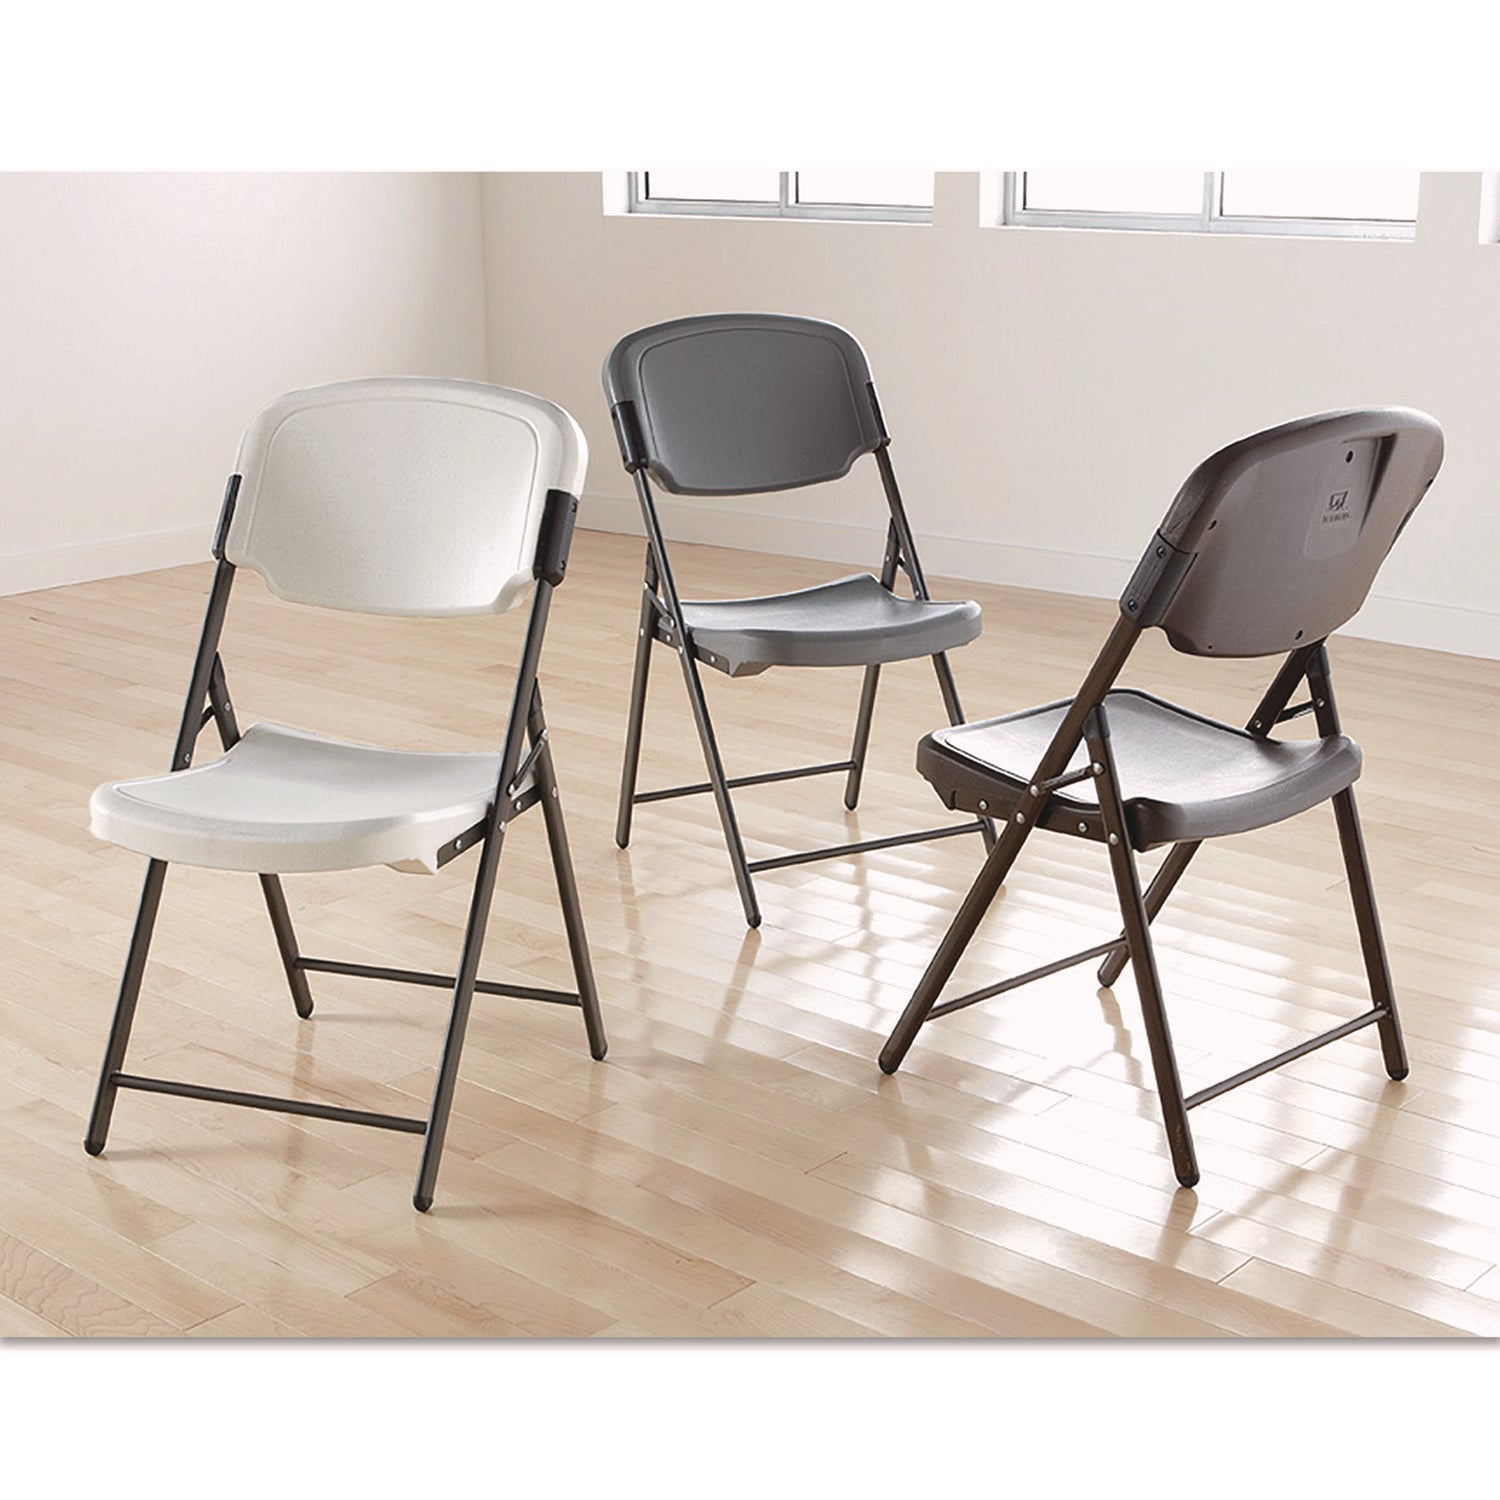 Rough n Ready Commercial Folding Chair, Supports Up to 350 lb, 15.25" Seat Height, Platinum Seat, Platinum Back, Black Base - 3